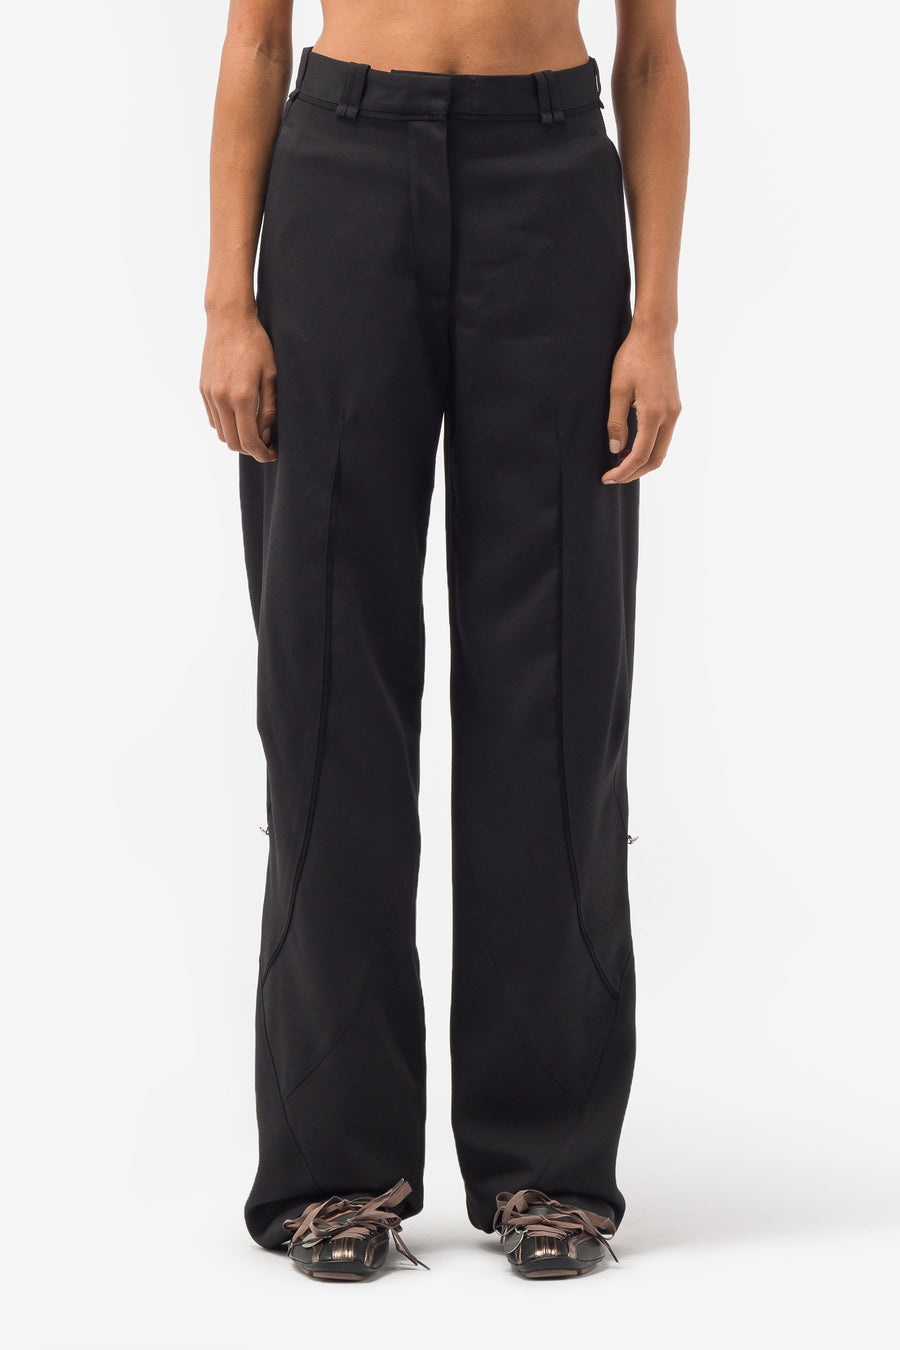 Hina Pleat Trousers in Crow Black - 1